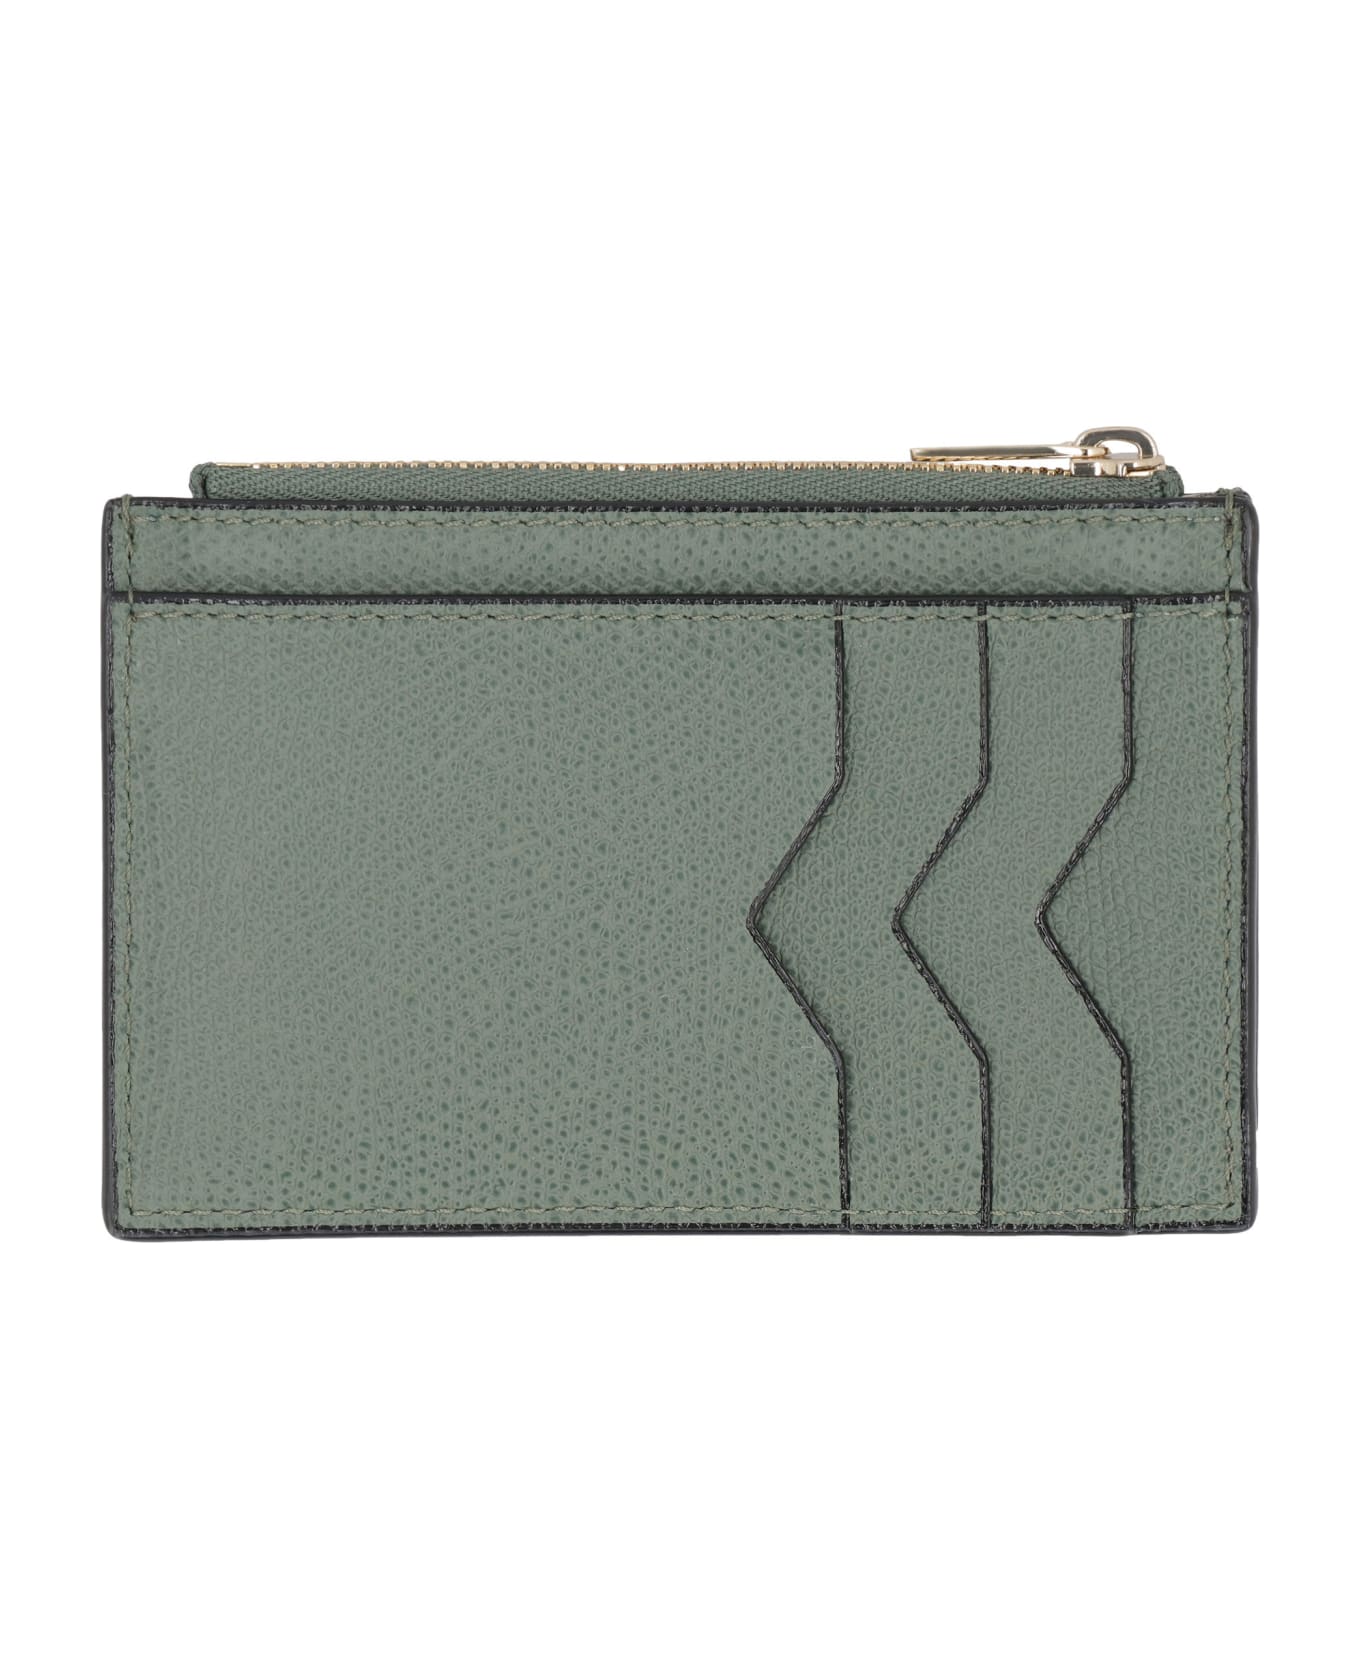 Valextra Leather Card Holder - green 財布